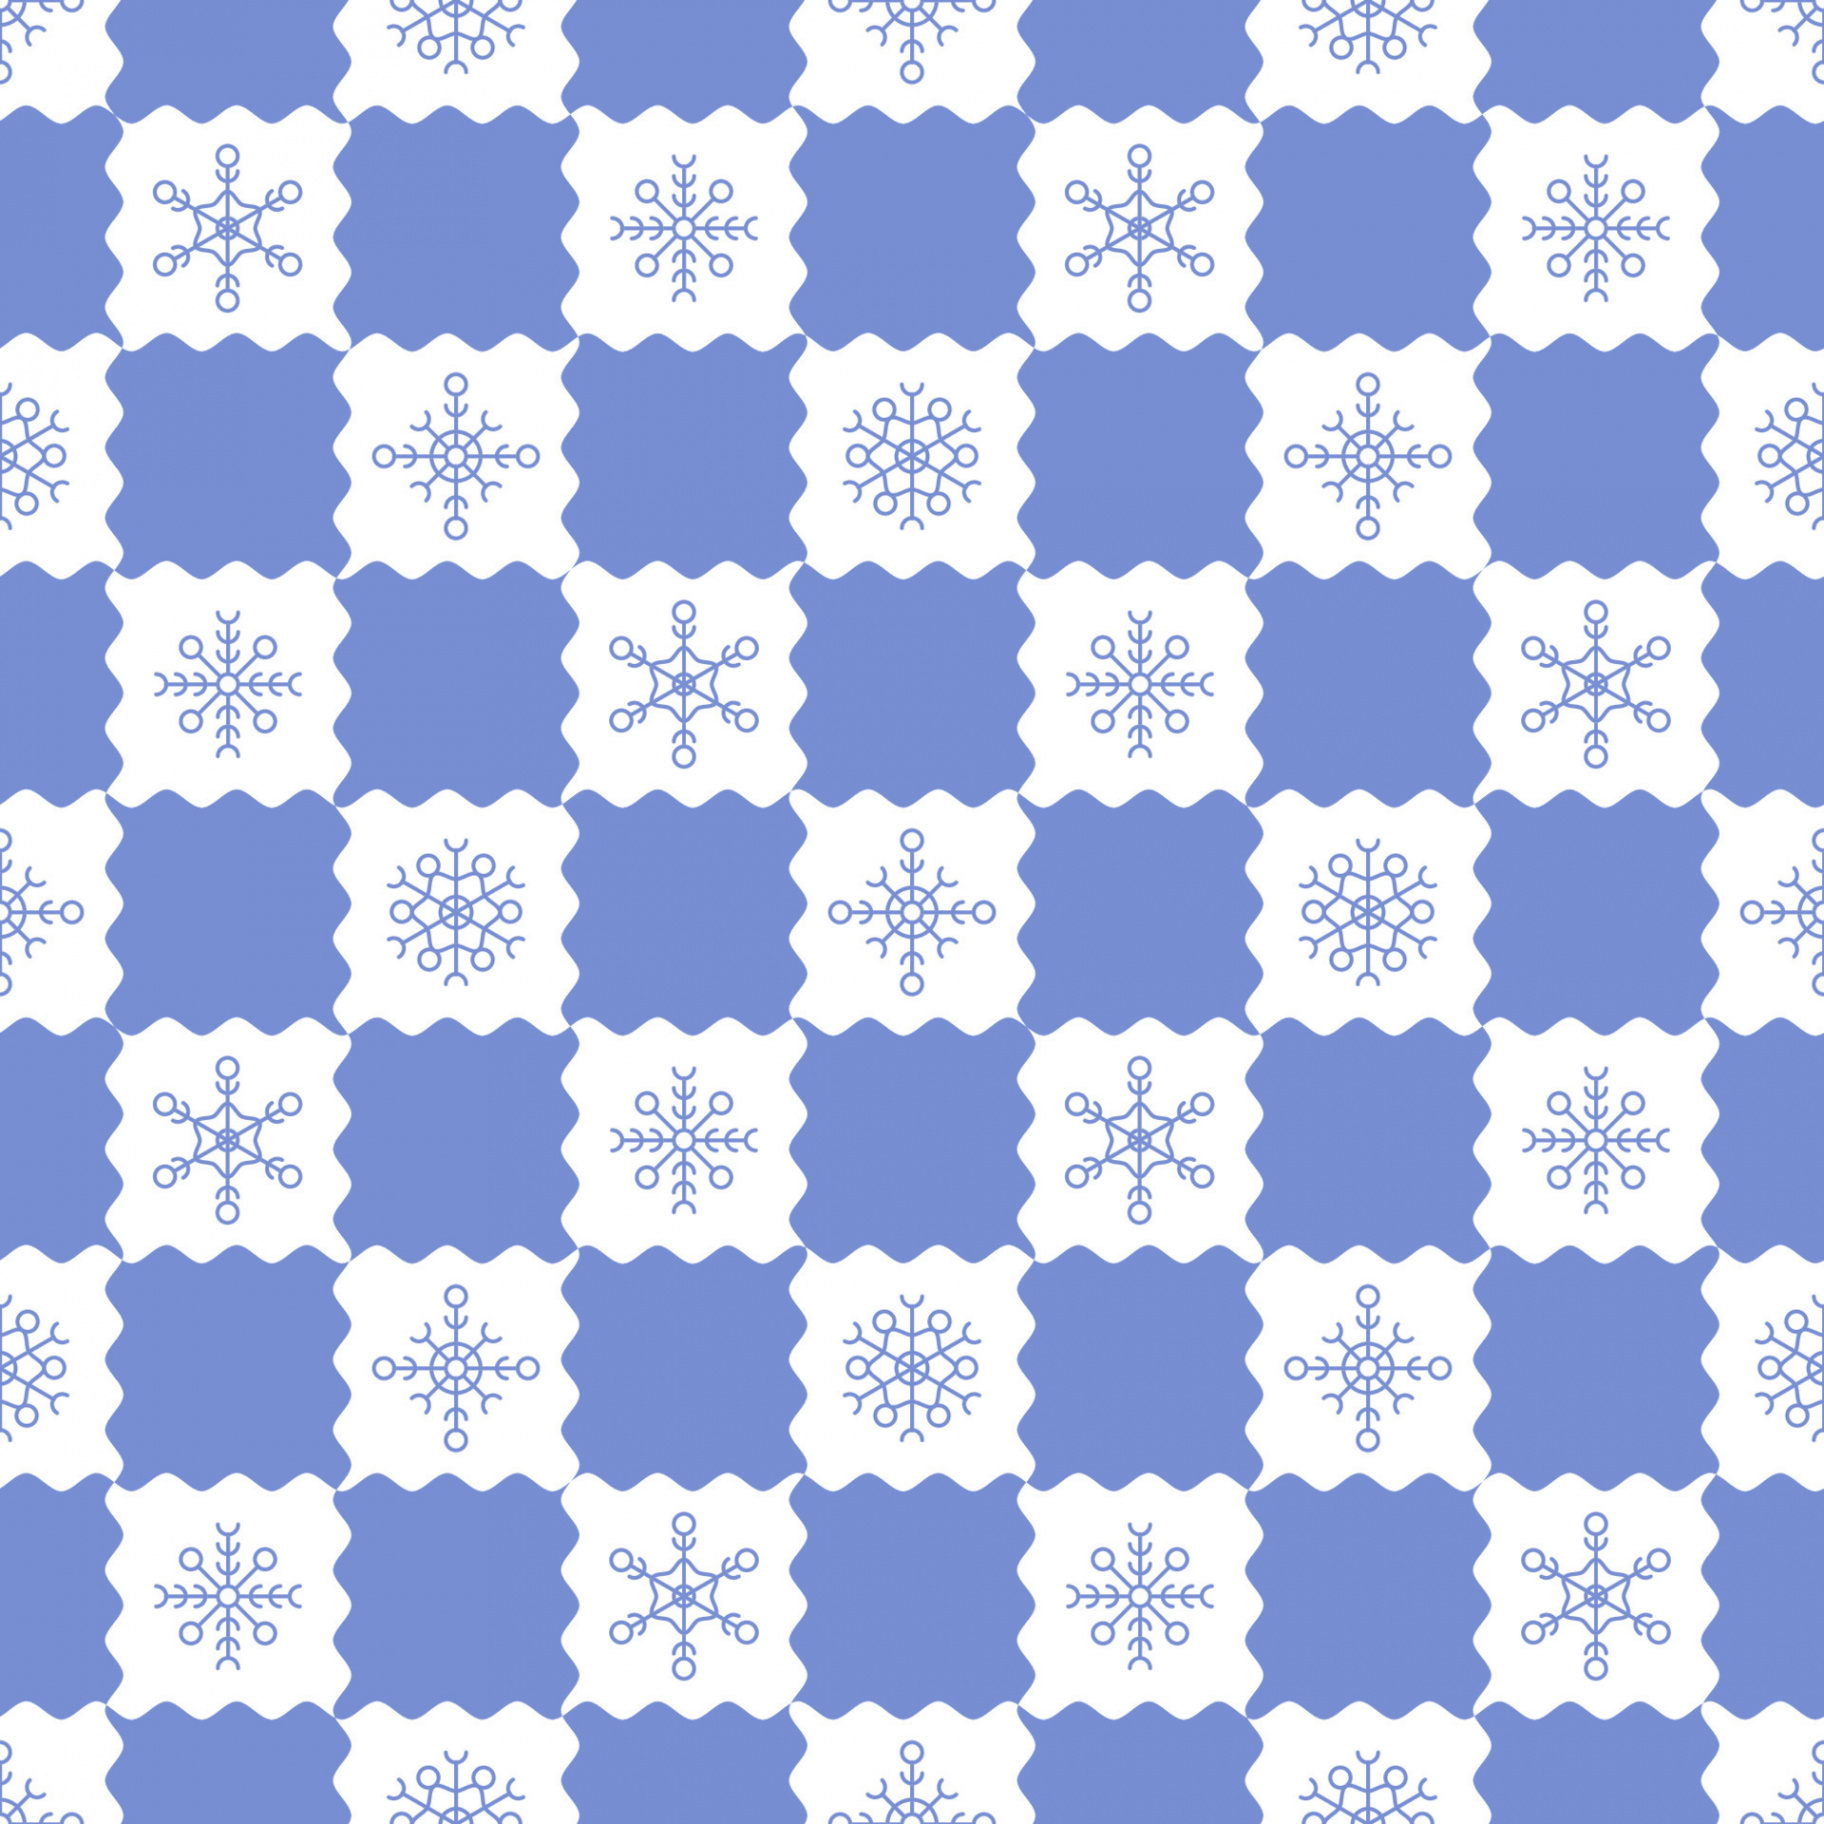 Christmas seamless pattern with snowflakes on chessboard